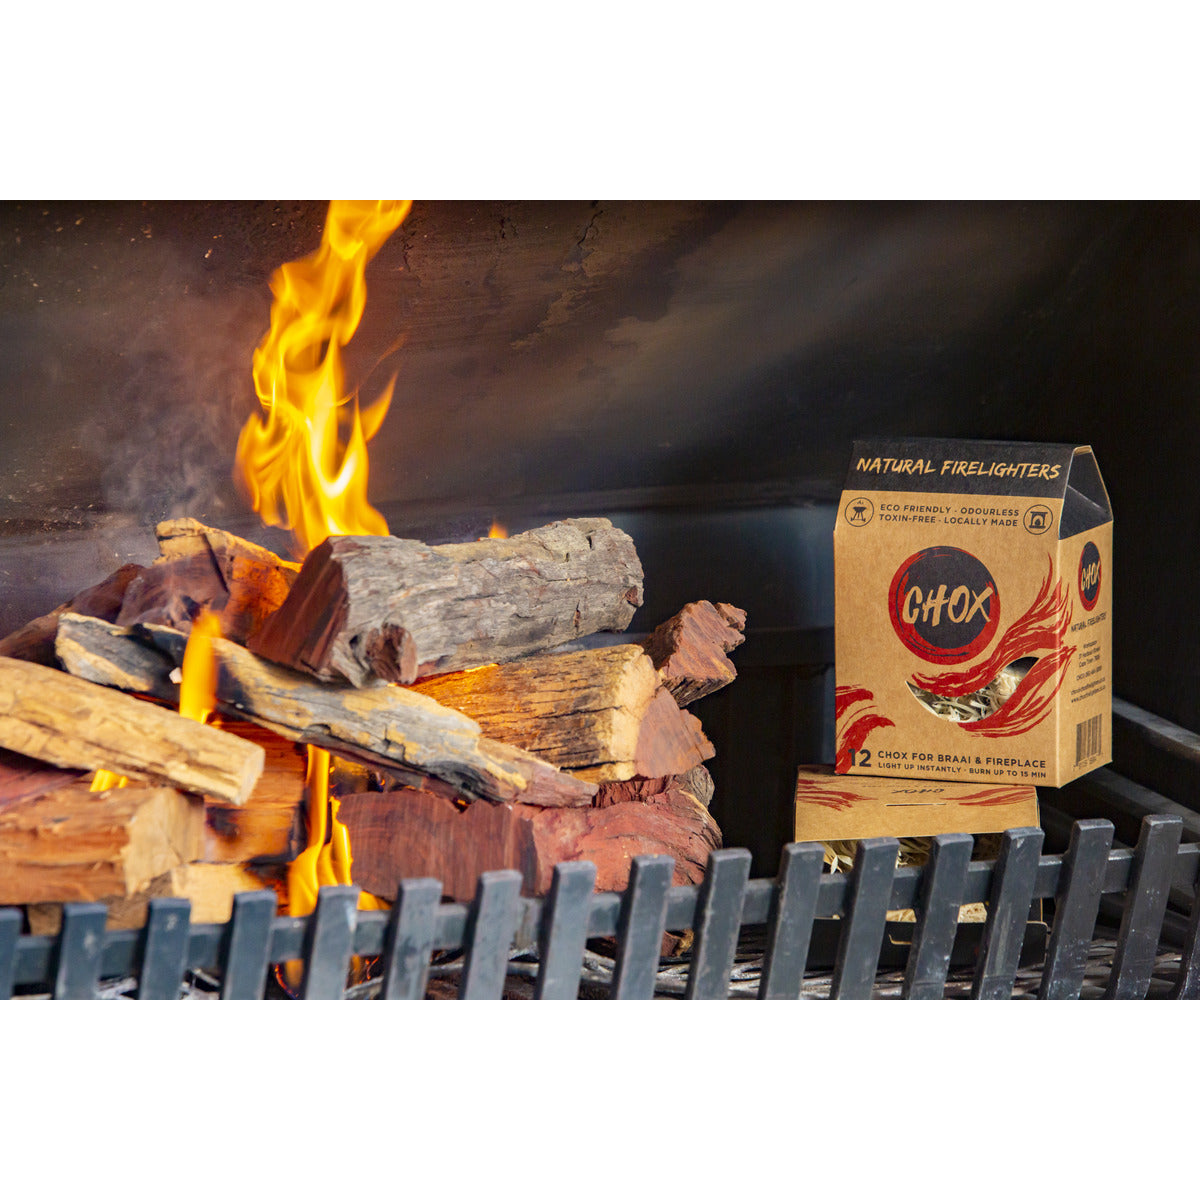 CHOX 12-Pack Natural Firelighters